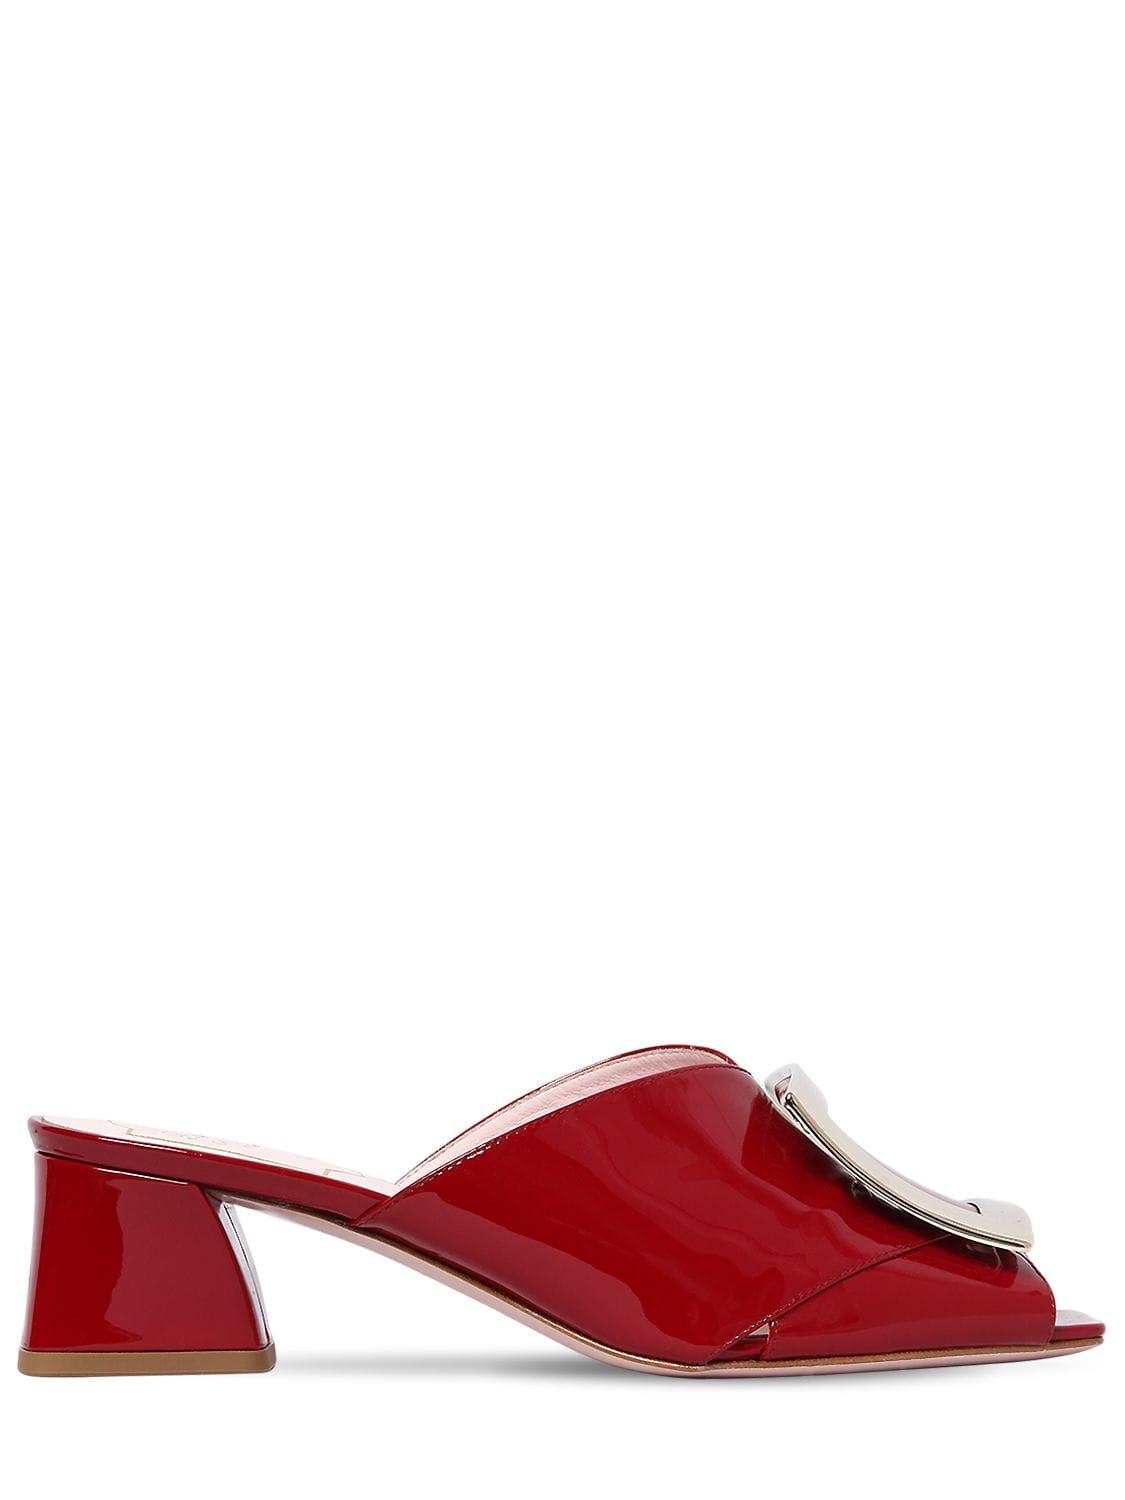 Roger Vivier \n Red Patent Leather Mules & Clogs - Lyst